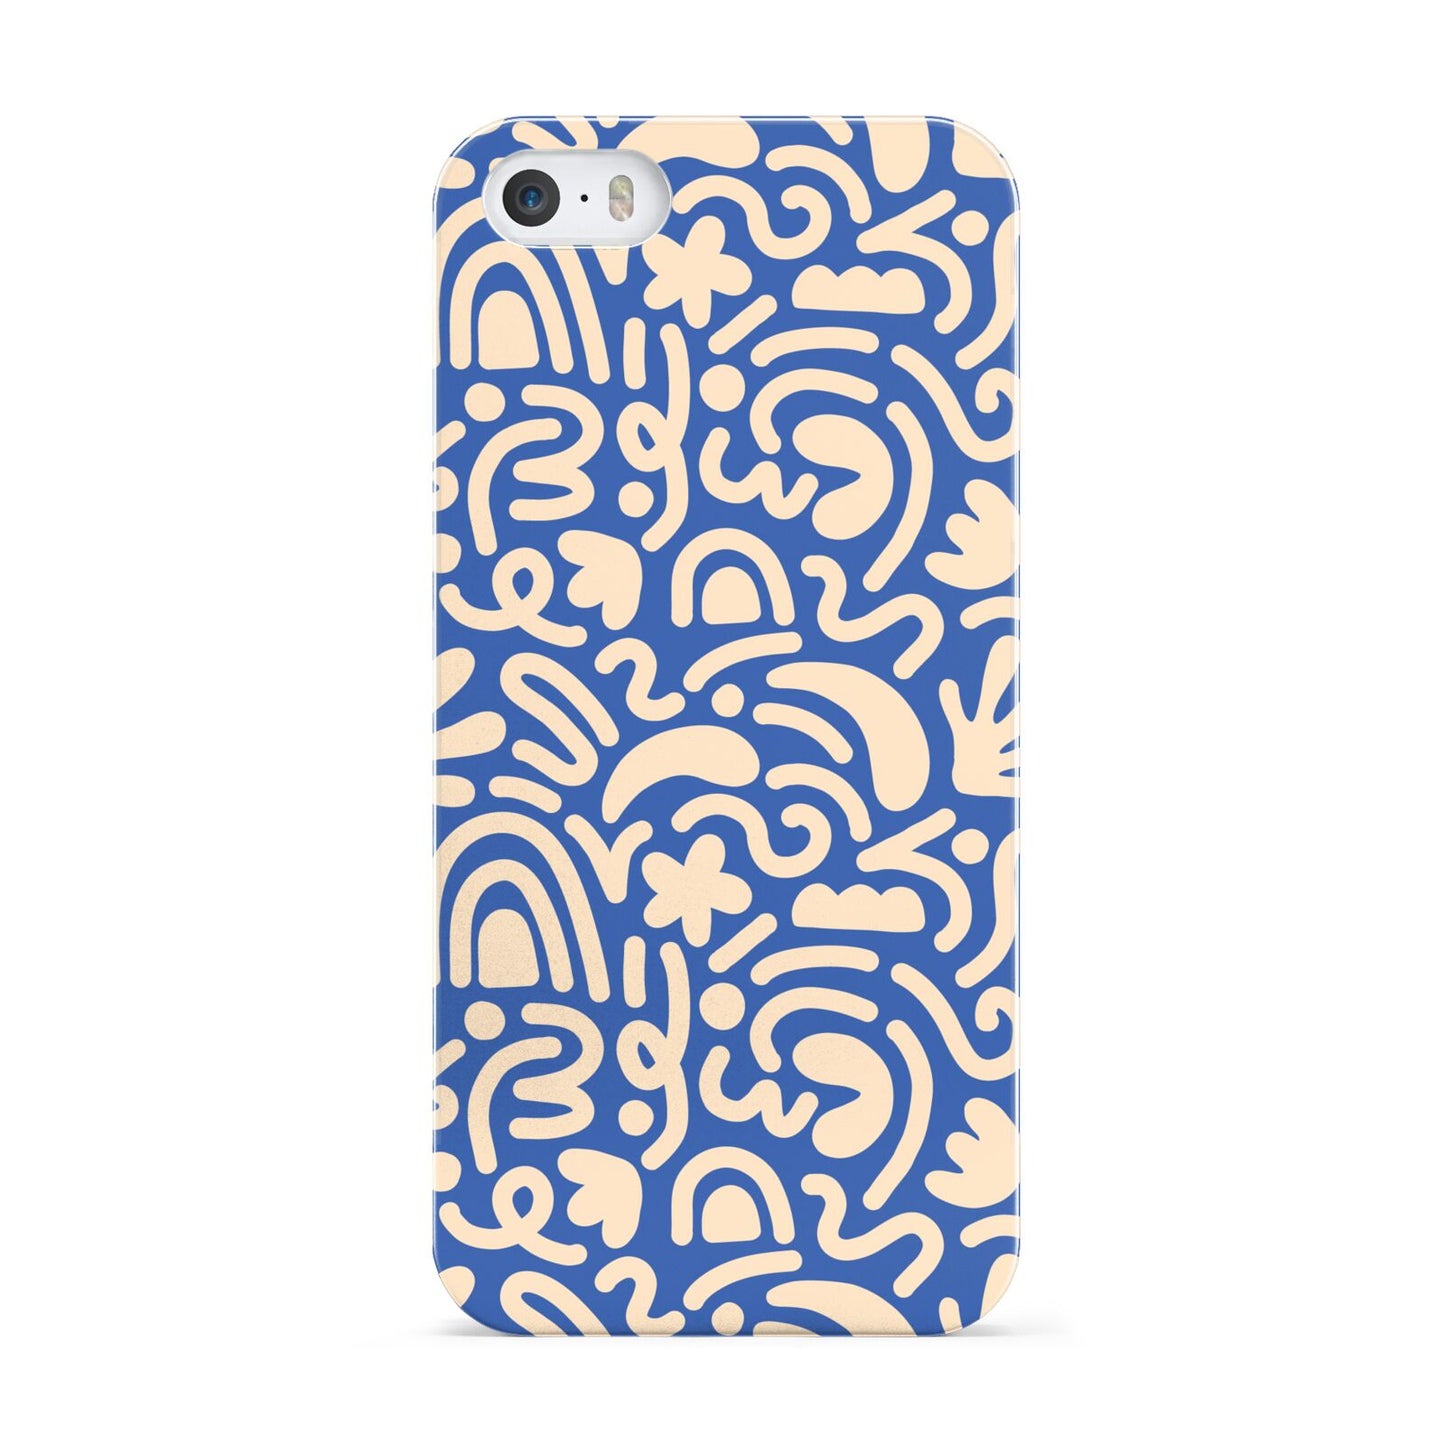 Abstract Apple iPhone 5 Case